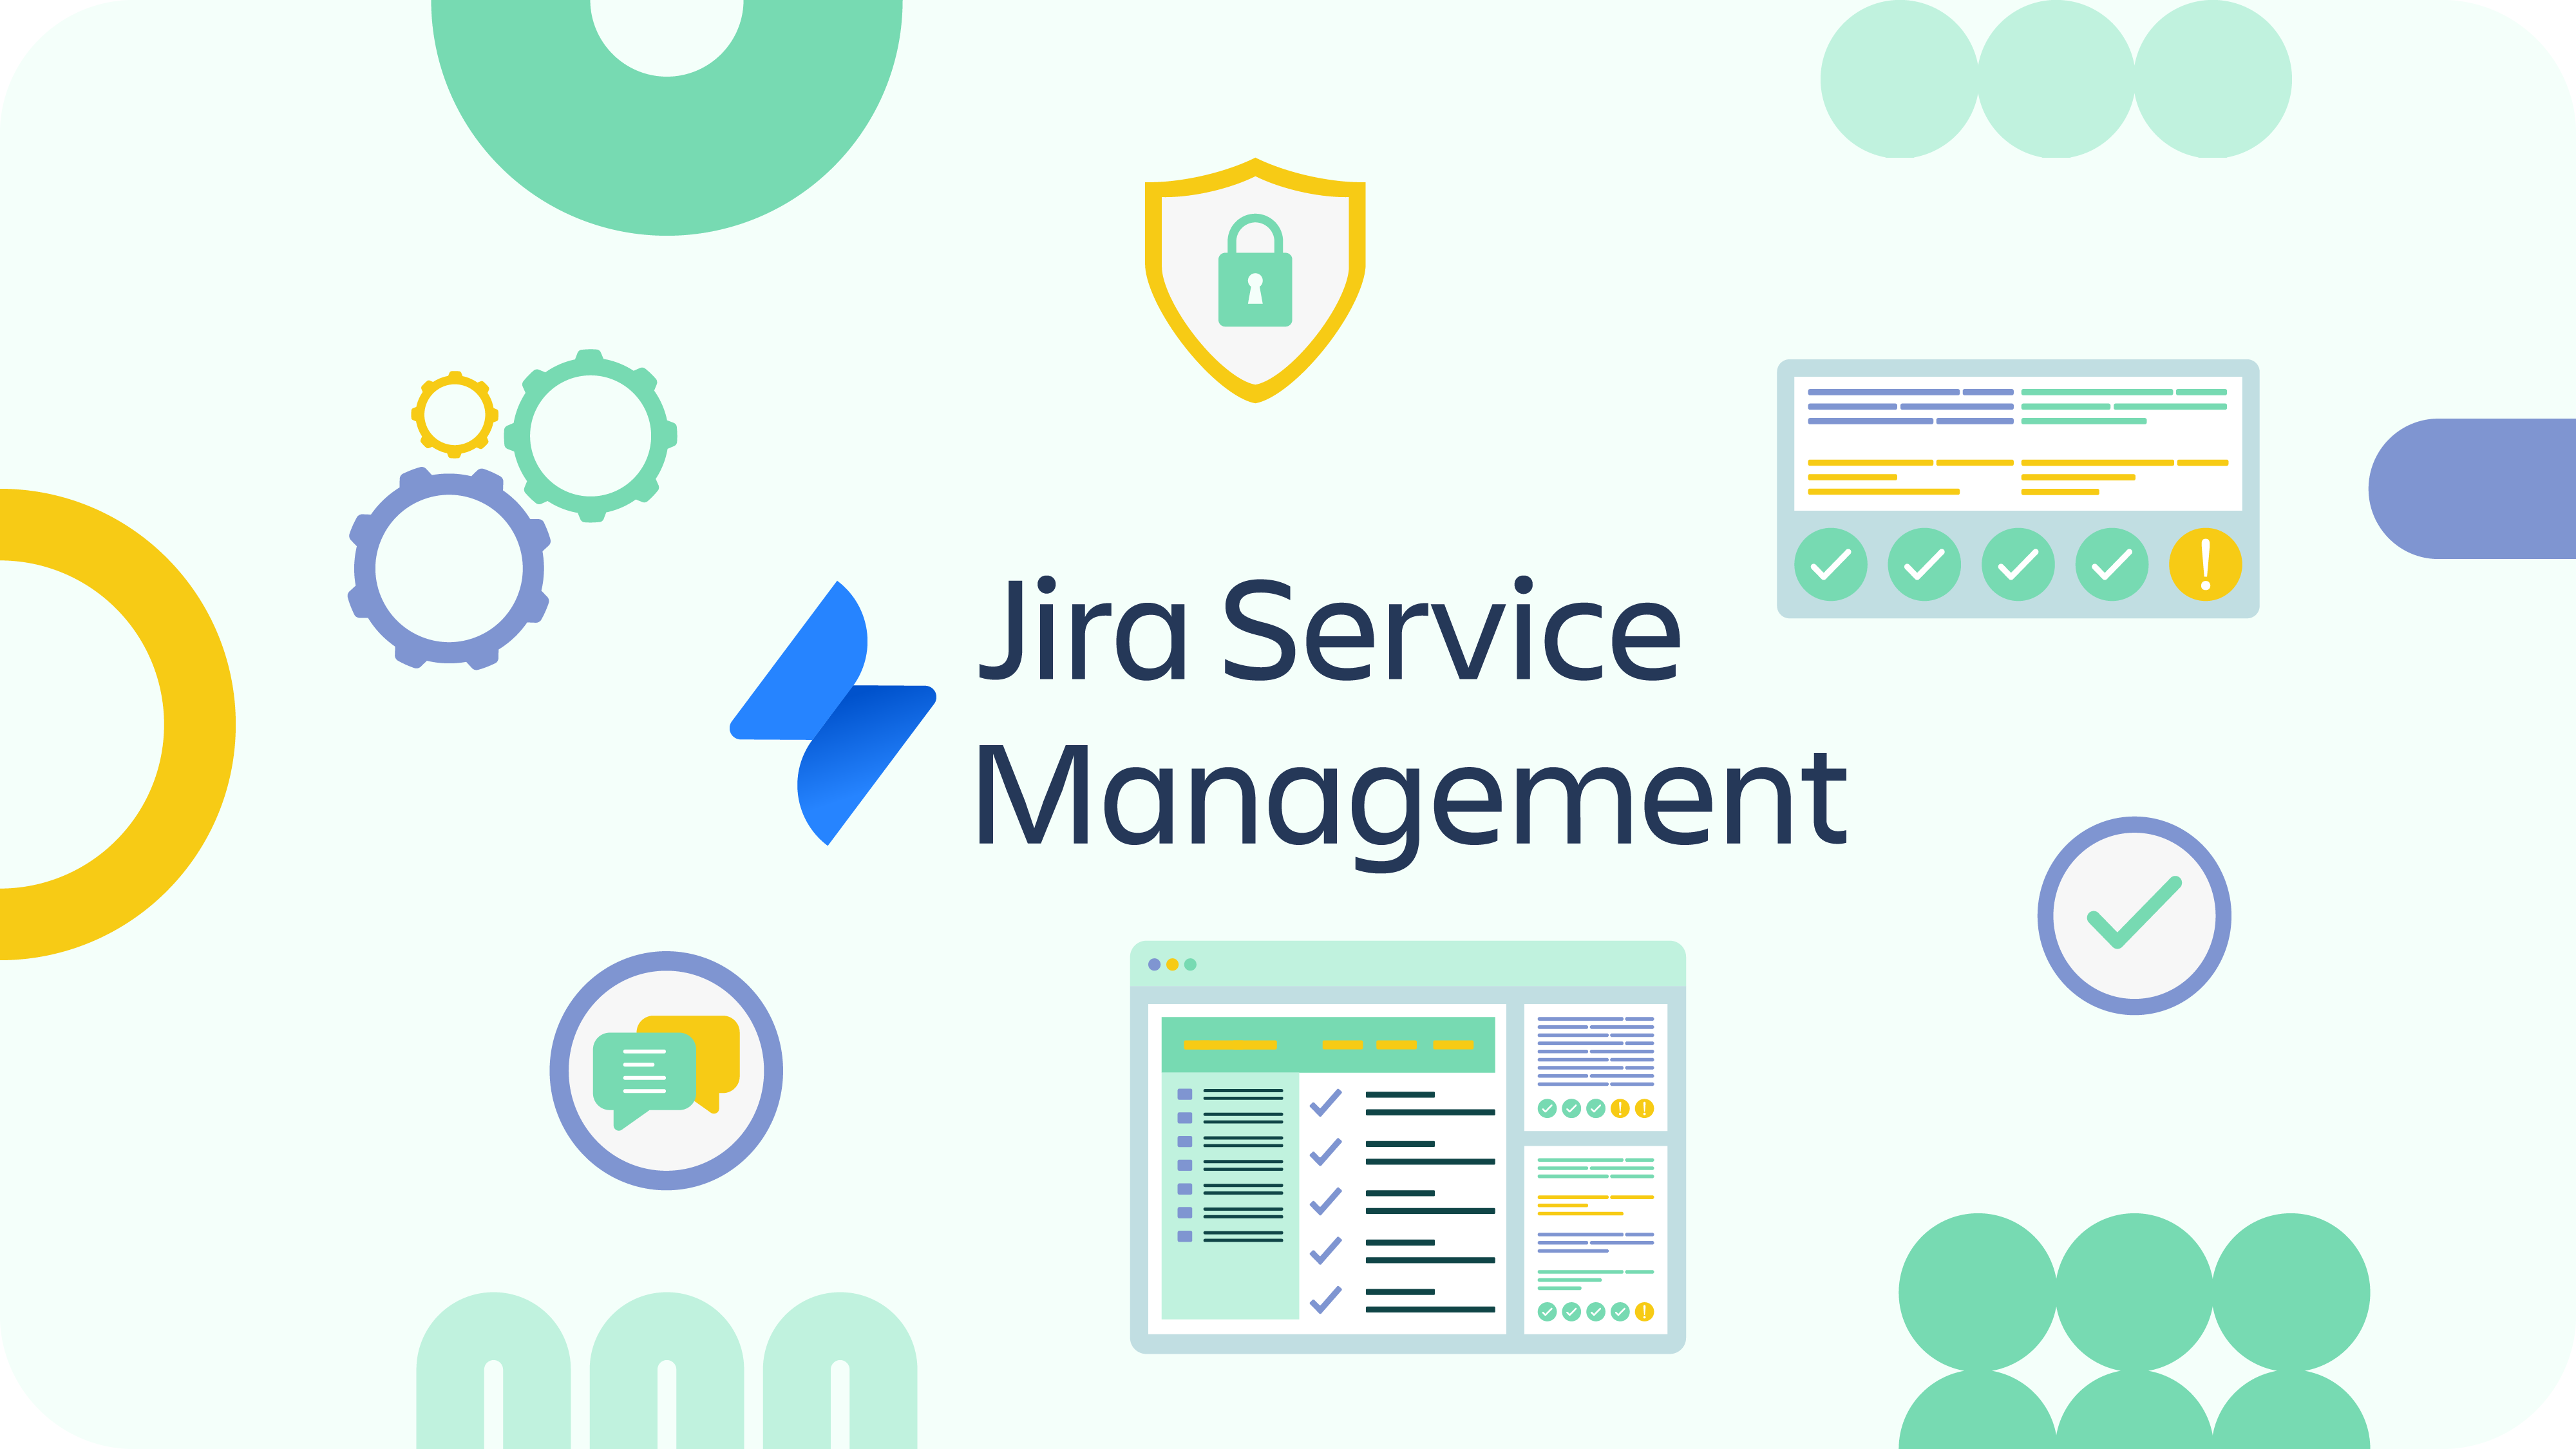 What is Jira Service Management